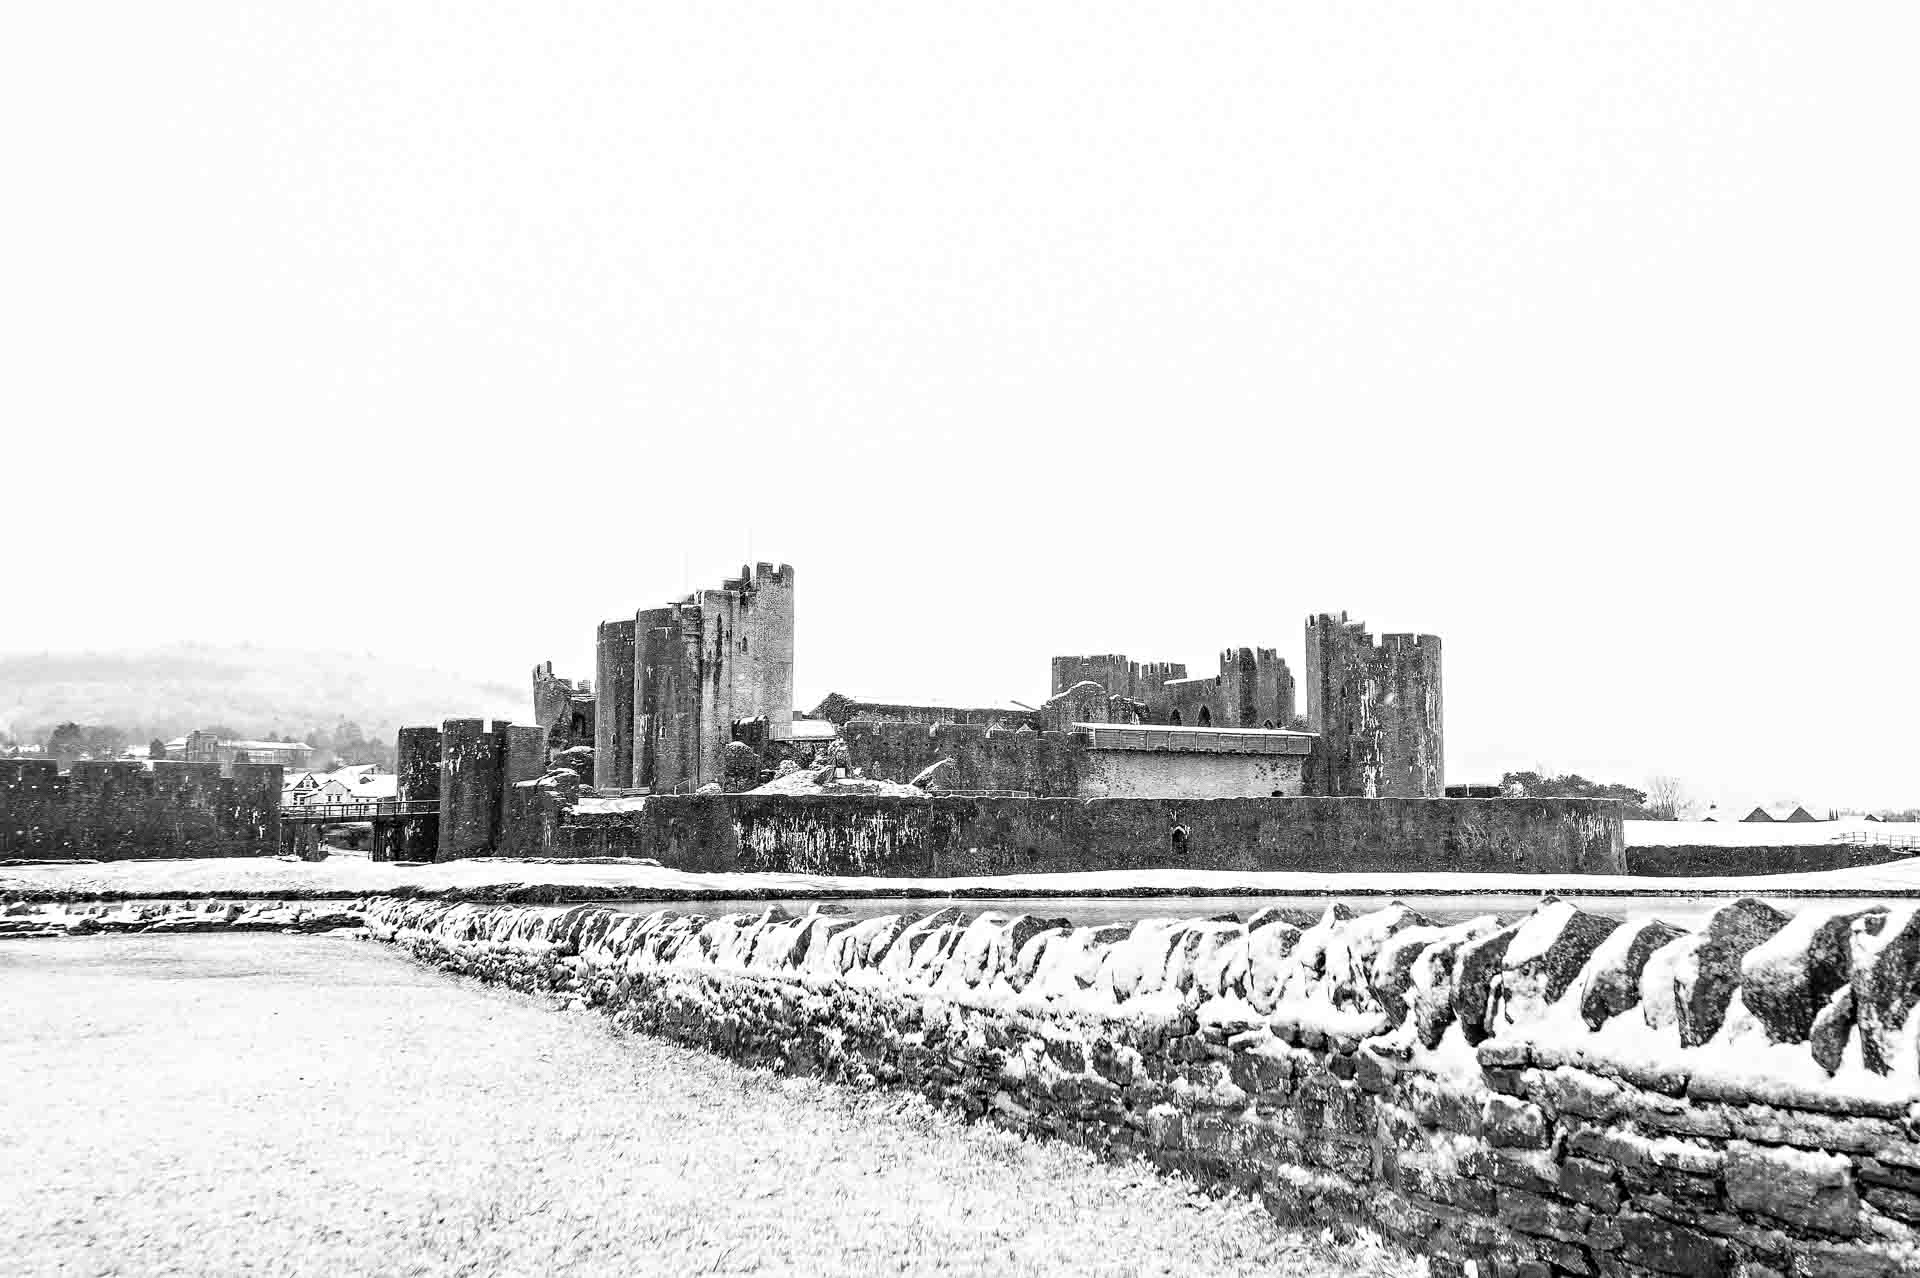 Caerphilly Castle Photographed From the North side with Stone Wall in the Snow